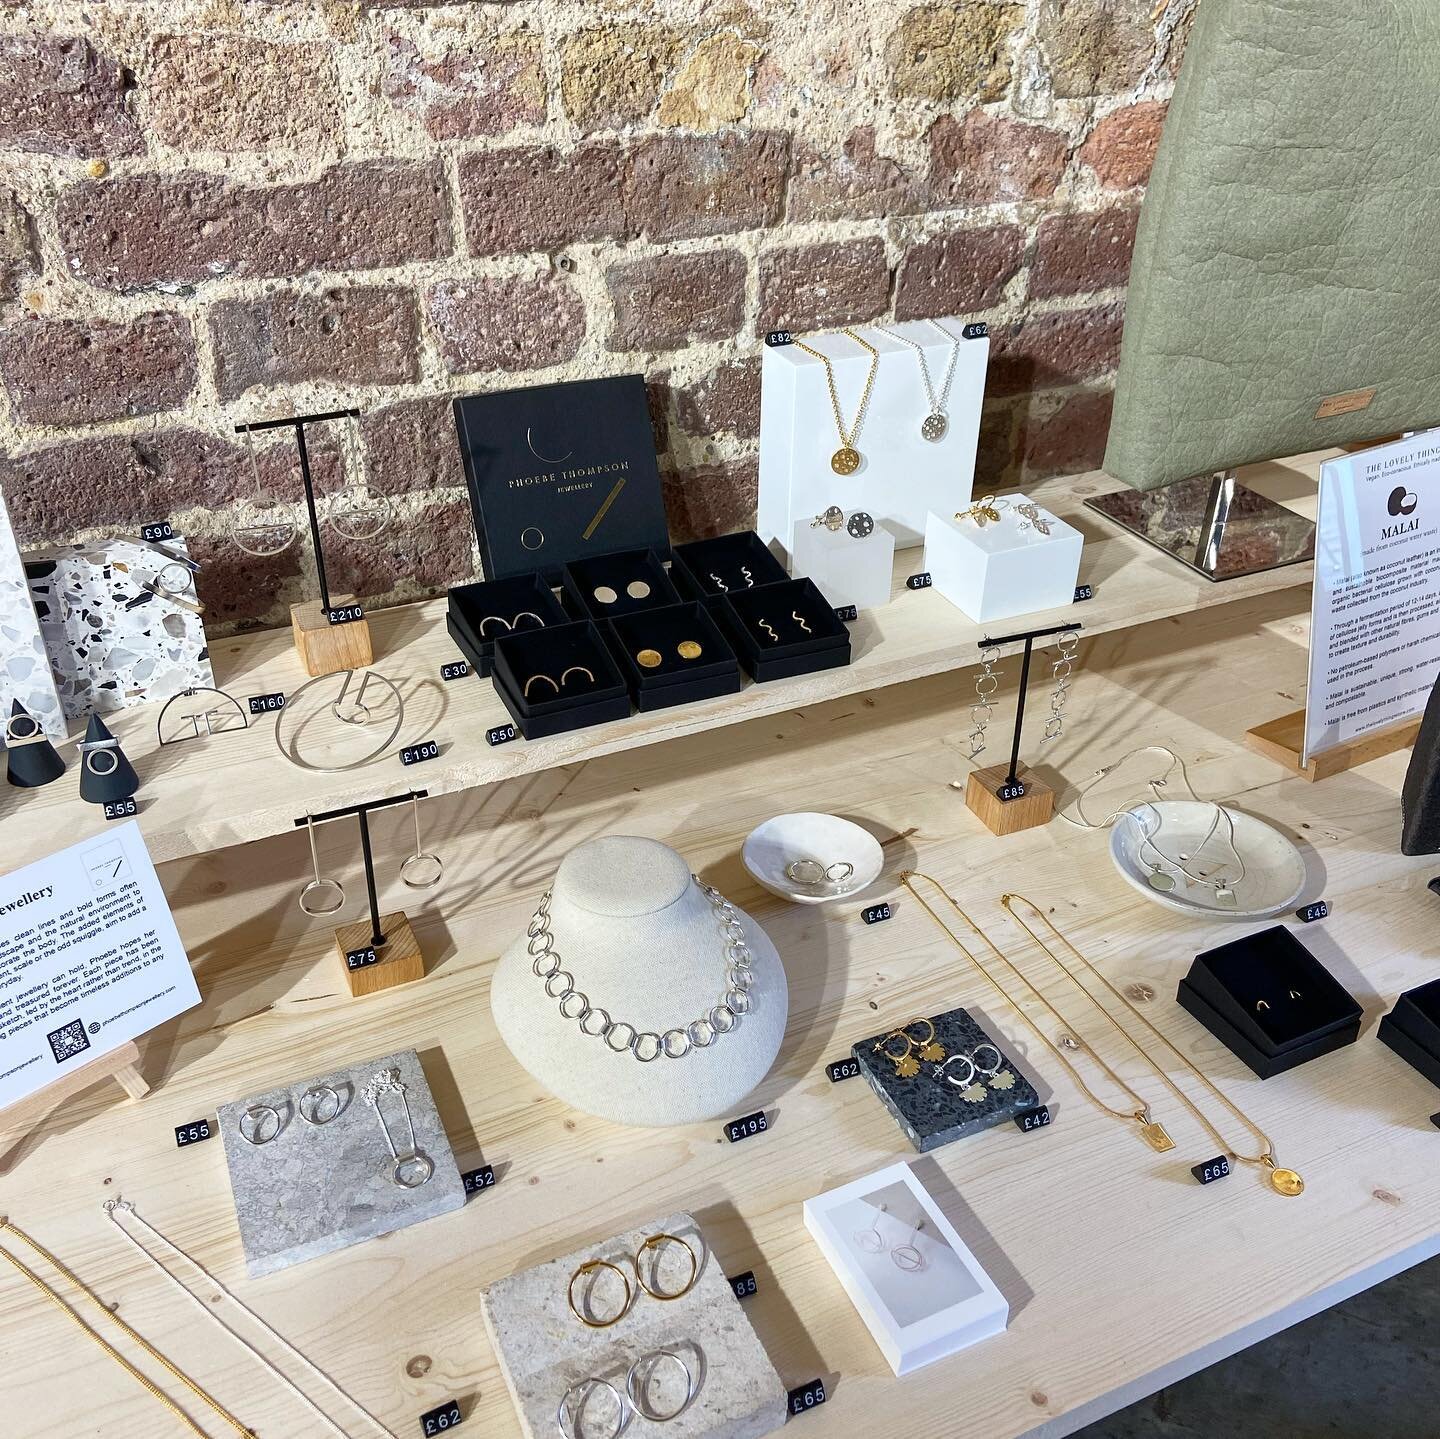 Collection available at @stories_ldn pop up for the next couple of weeks! Head on down to @deptfordmktyard to browse 〰️Arch 5 - next to @jarsbarlondon 😏
.
.
.
.
#jewellerycollection #jewelleryshop #smallbrands #smallbrandpopup #popuplondon #stories 